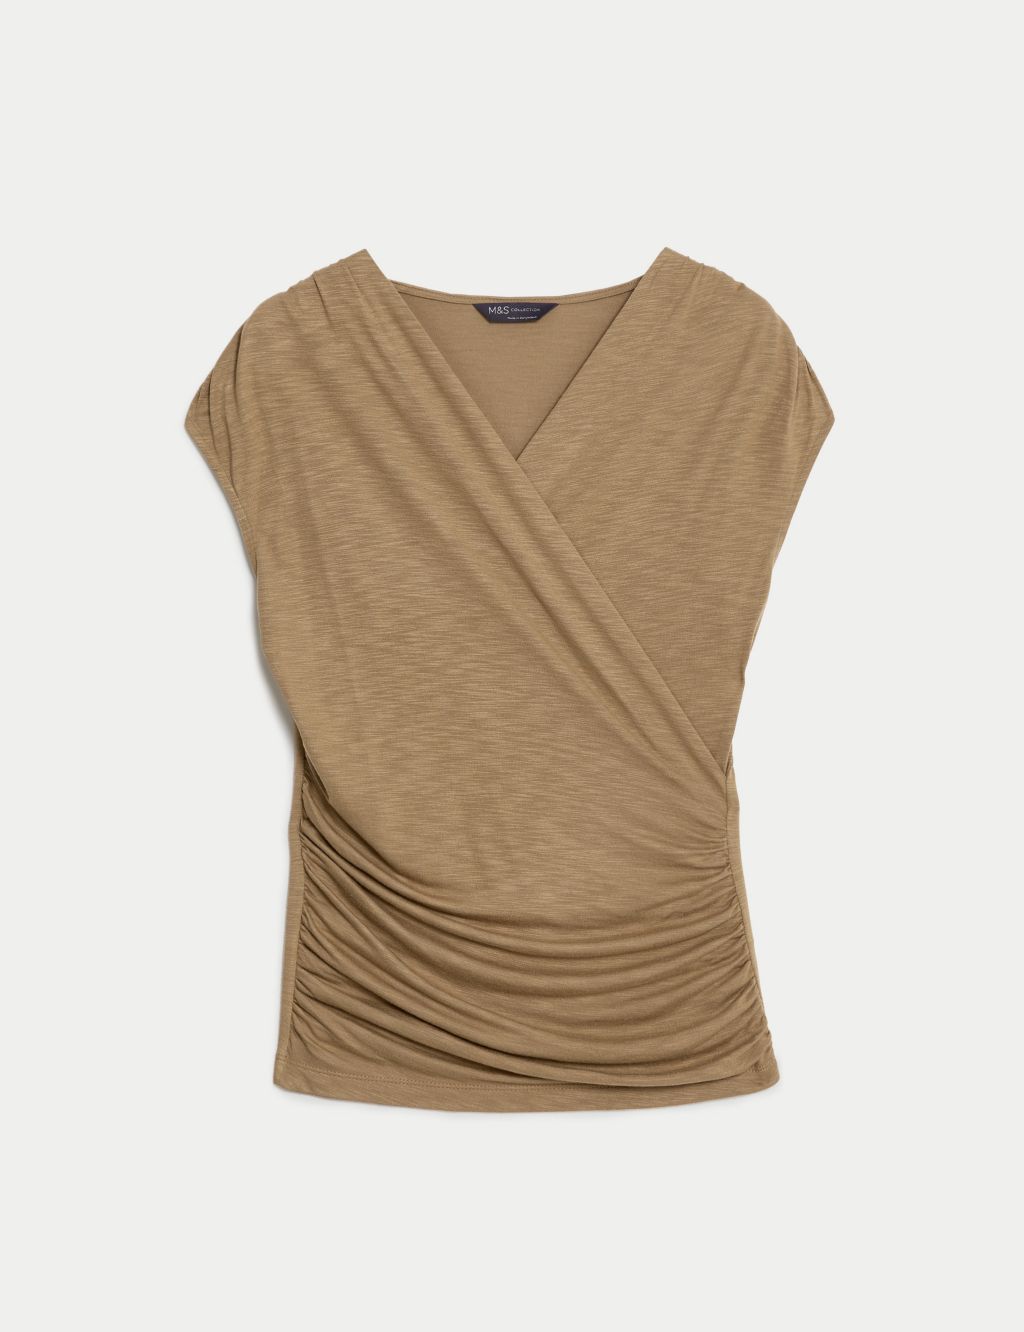 Jersey Ruched Wrap Top image 2